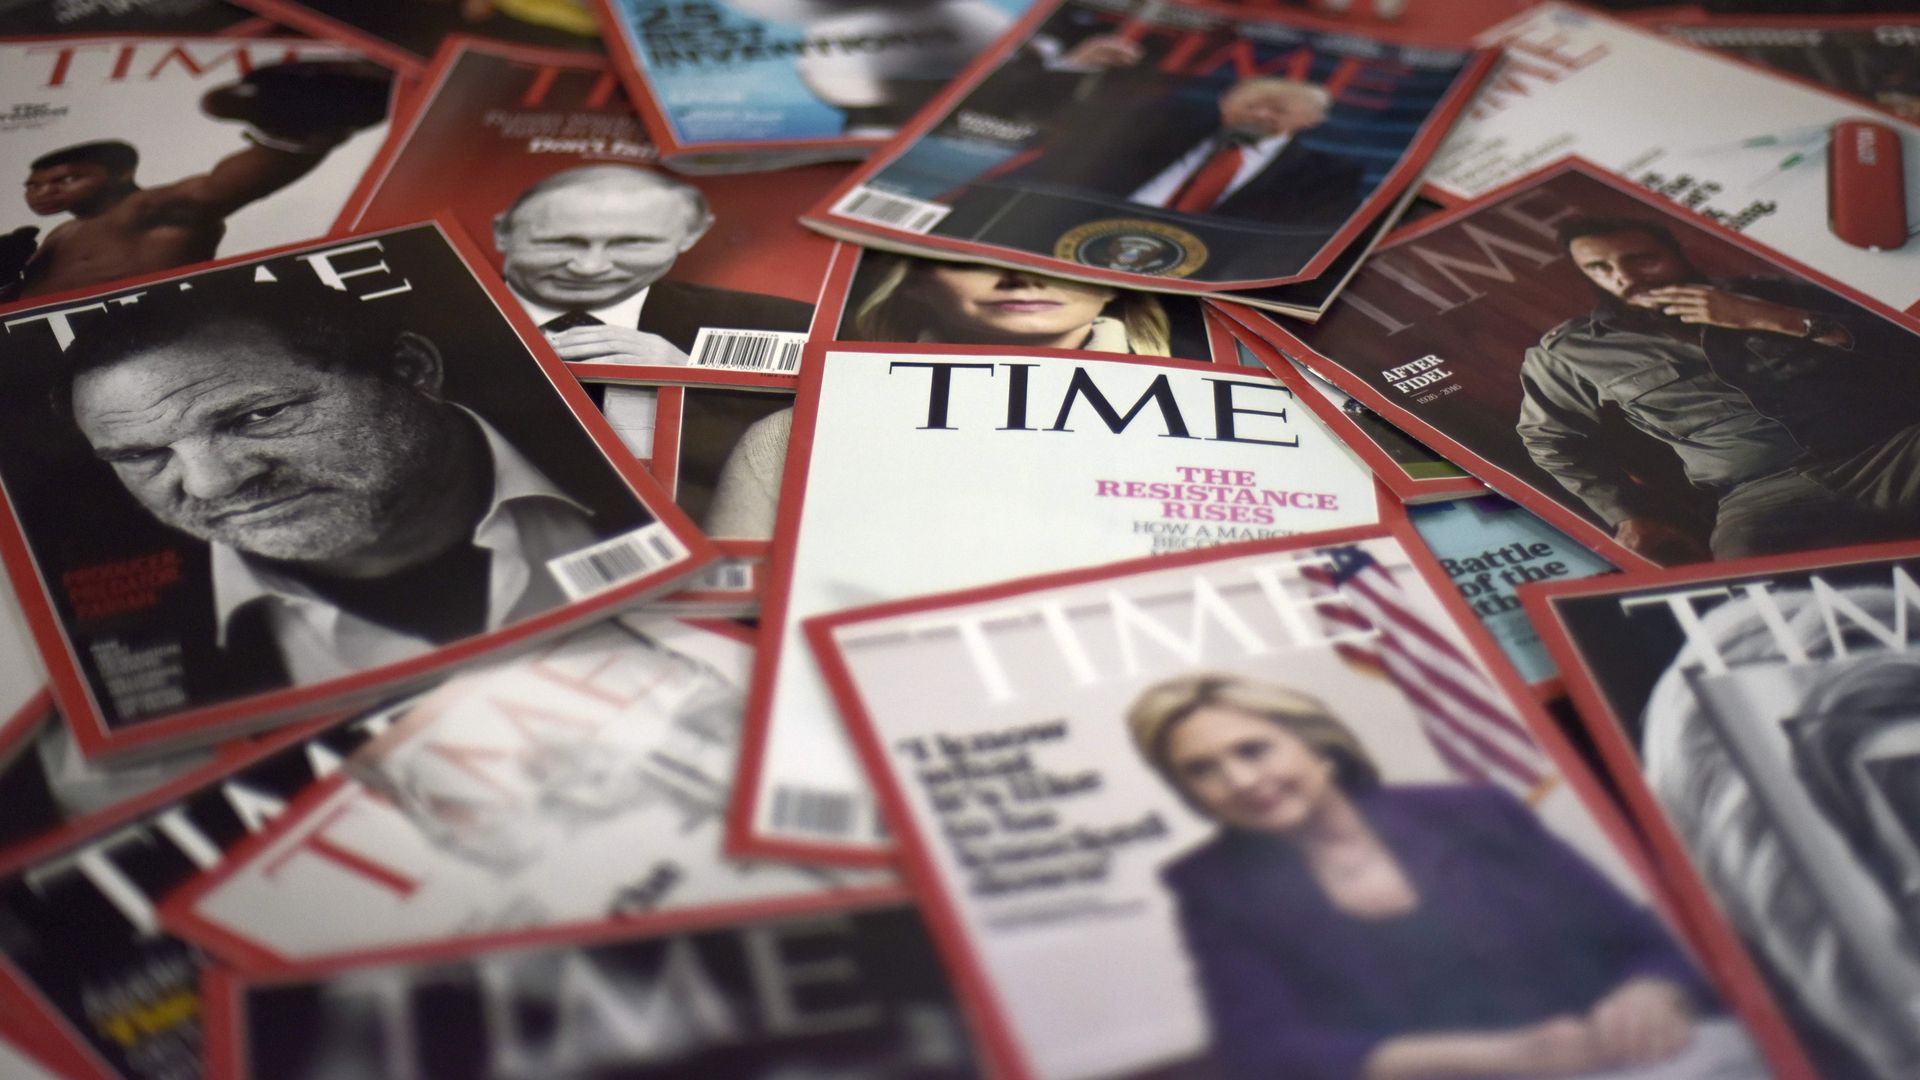 Pile of Time magazines.